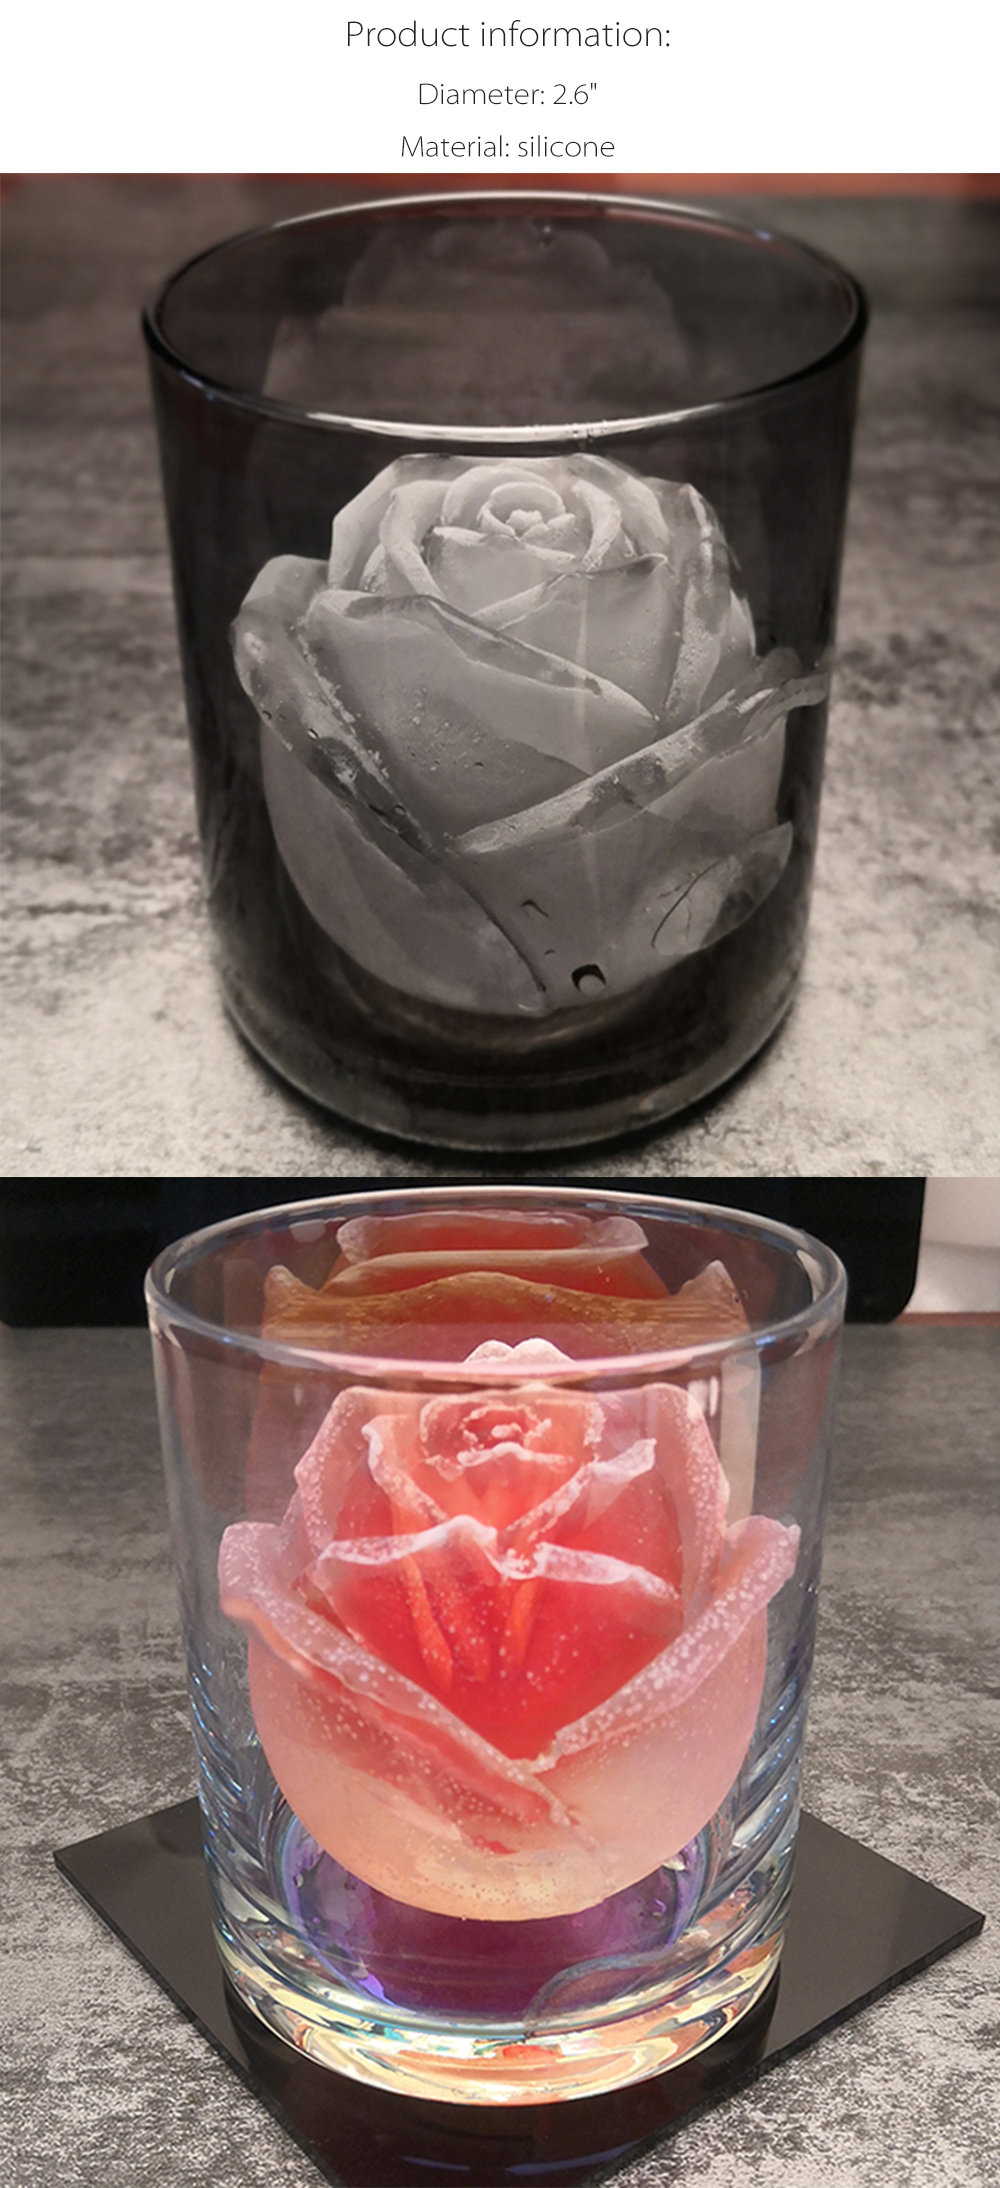 3D Silicone Rose Shape Ice Cubes Mold Mould for Cocktails Drink Iced Tea Kitchen 